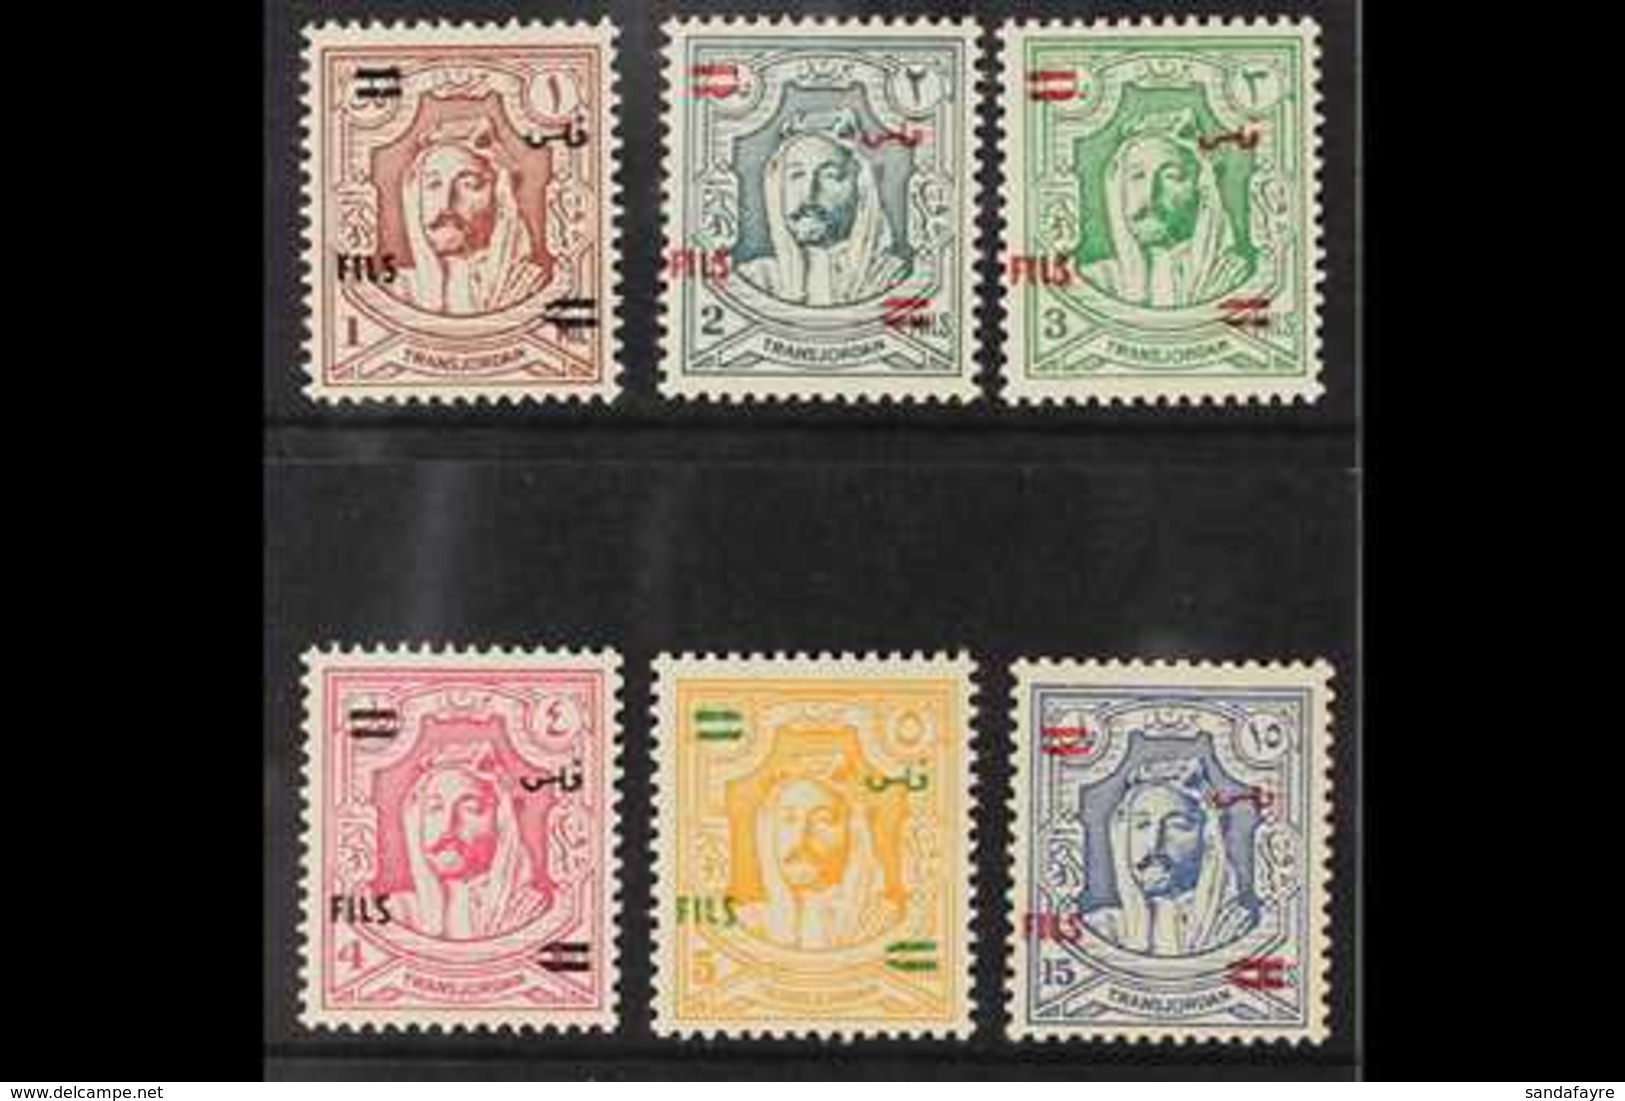 1952 Overprints On 1942 Litho Issues Complete Set, SG 307/12, Never Hinged Mint, Fresh. (6 Stamps) For More Images, Plea - Jordan